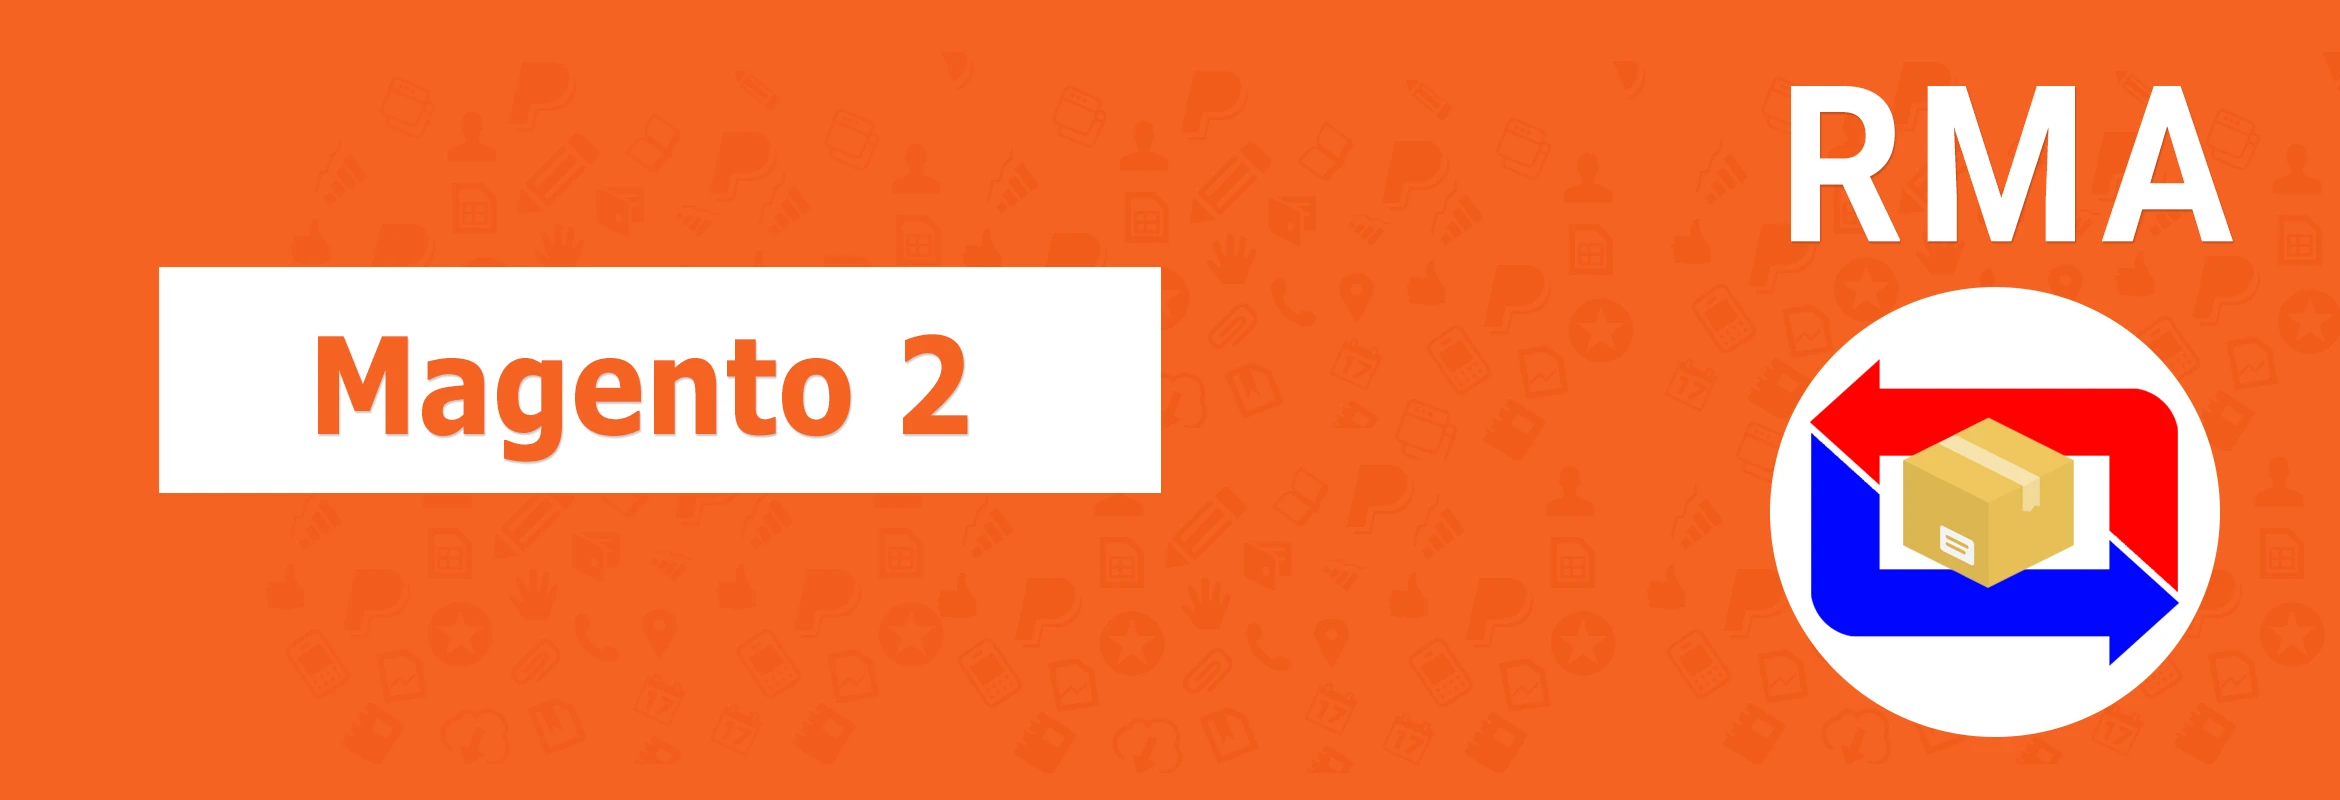 Meet our first extension for Magento 2!